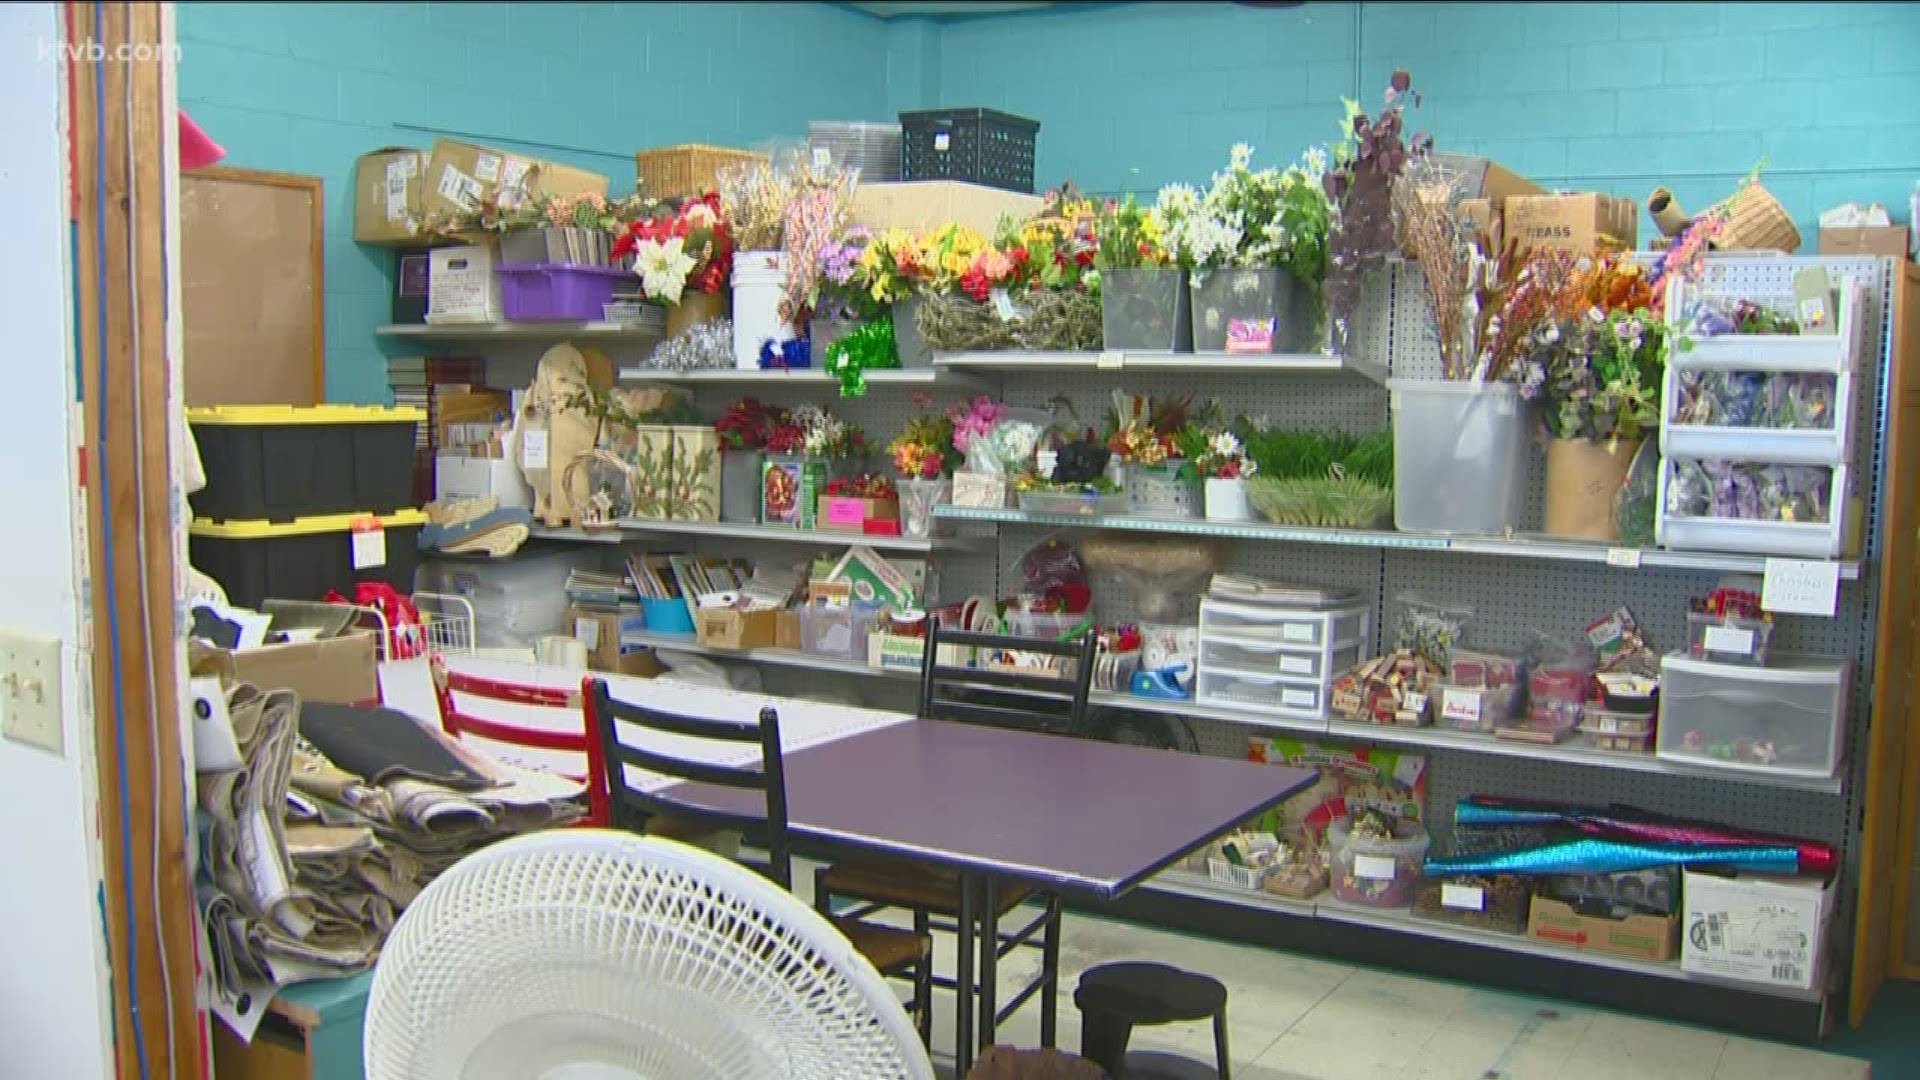 The Garden City market is a place where you can get craft supplies for next to nothing.